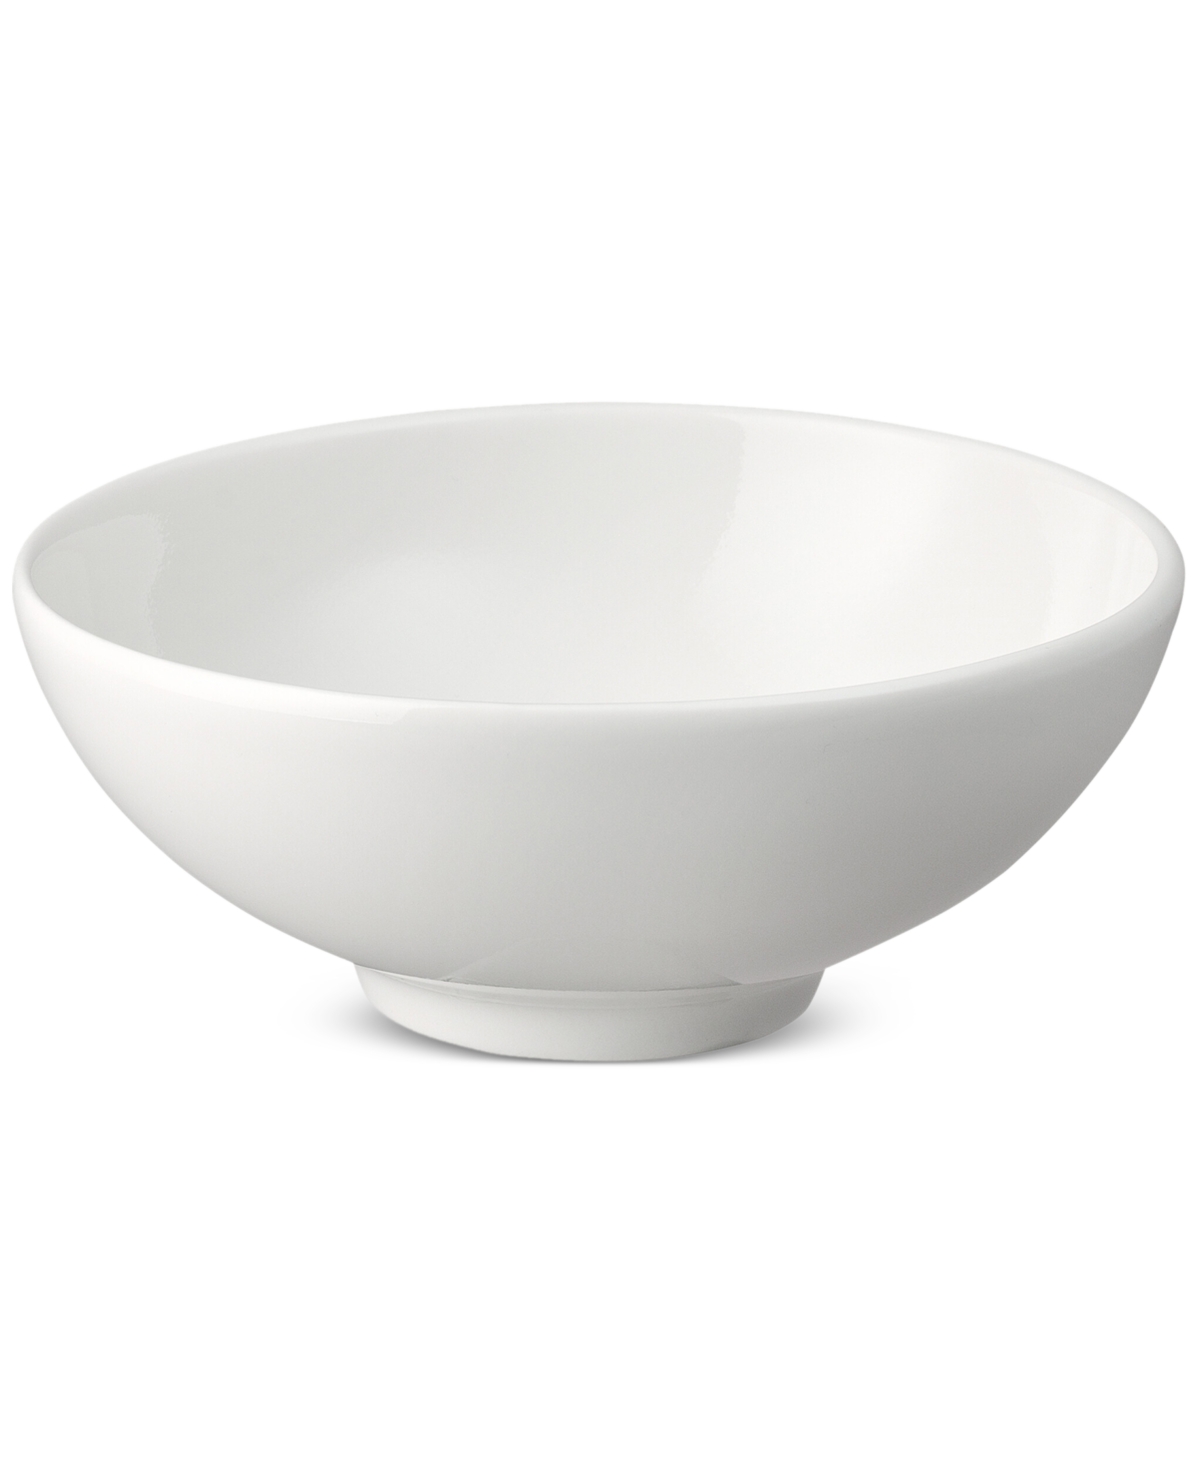 Classic White Collection Porcelain Small Bowl - White